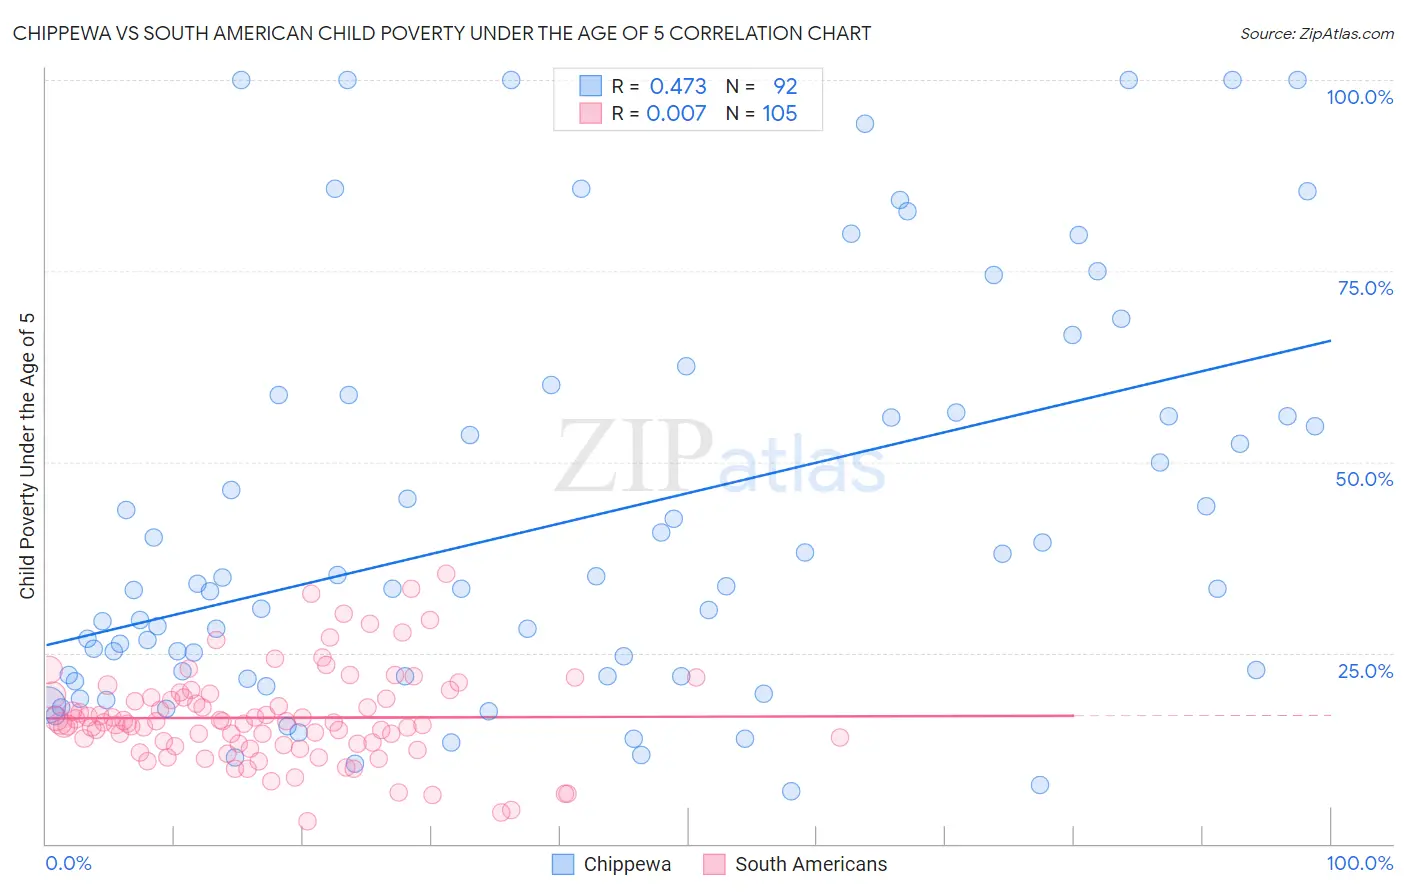 Chippewa vs South American Child Poverty Under the Age of 5